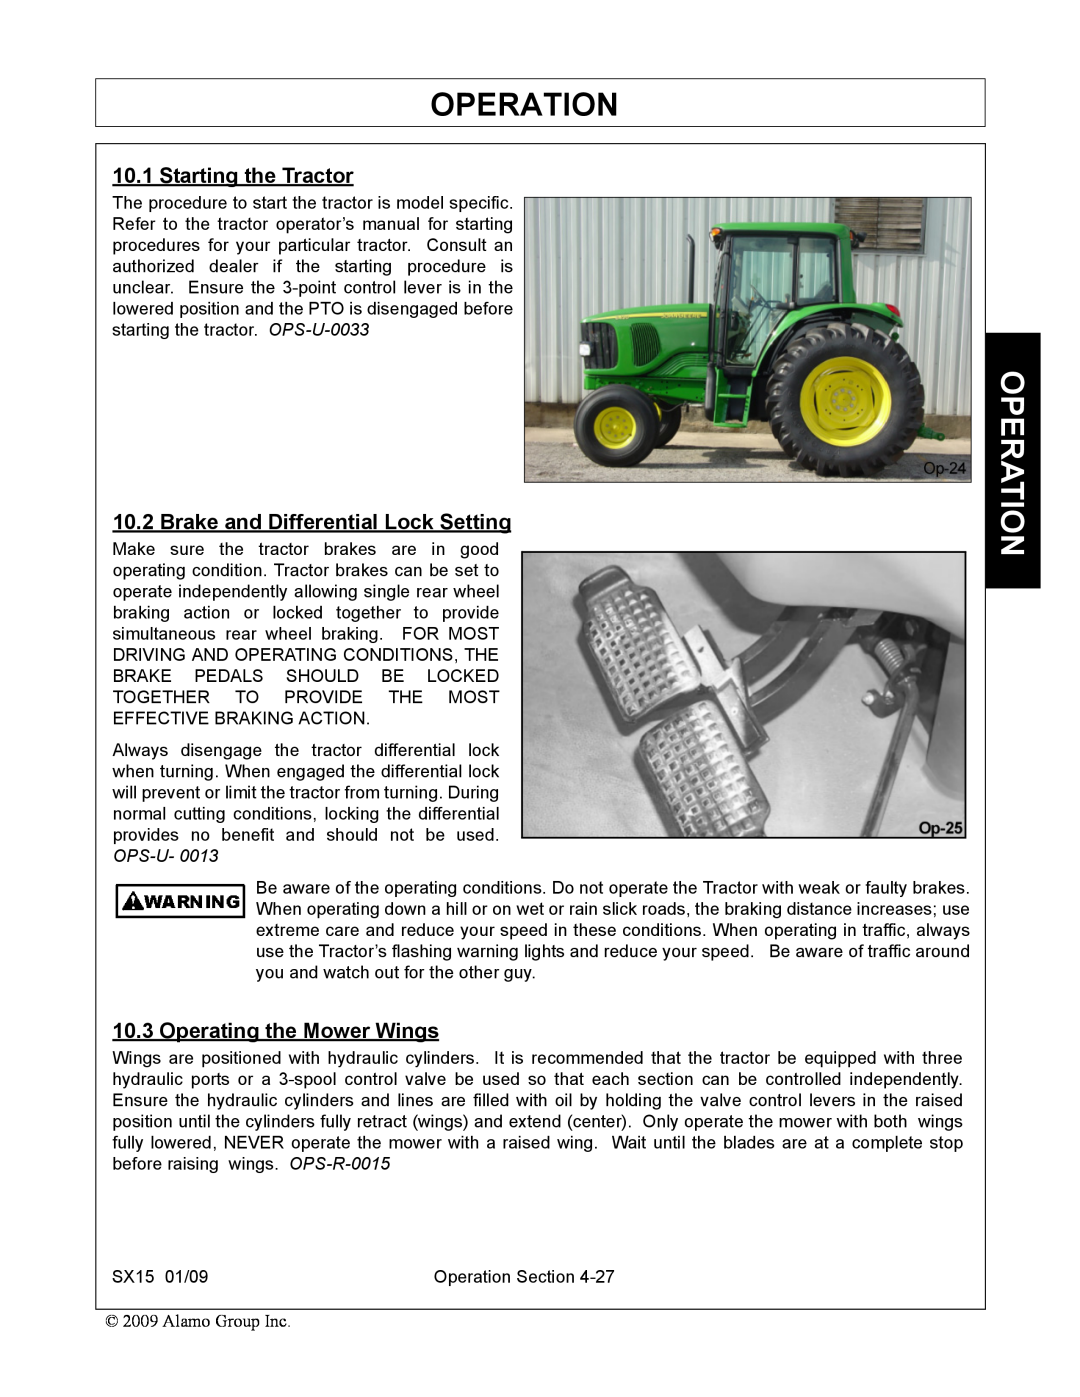 Alamo SX15 manual Starting the Tractor, Brake and Differential Lock Setting, Operating the Mower Wings, Operation 